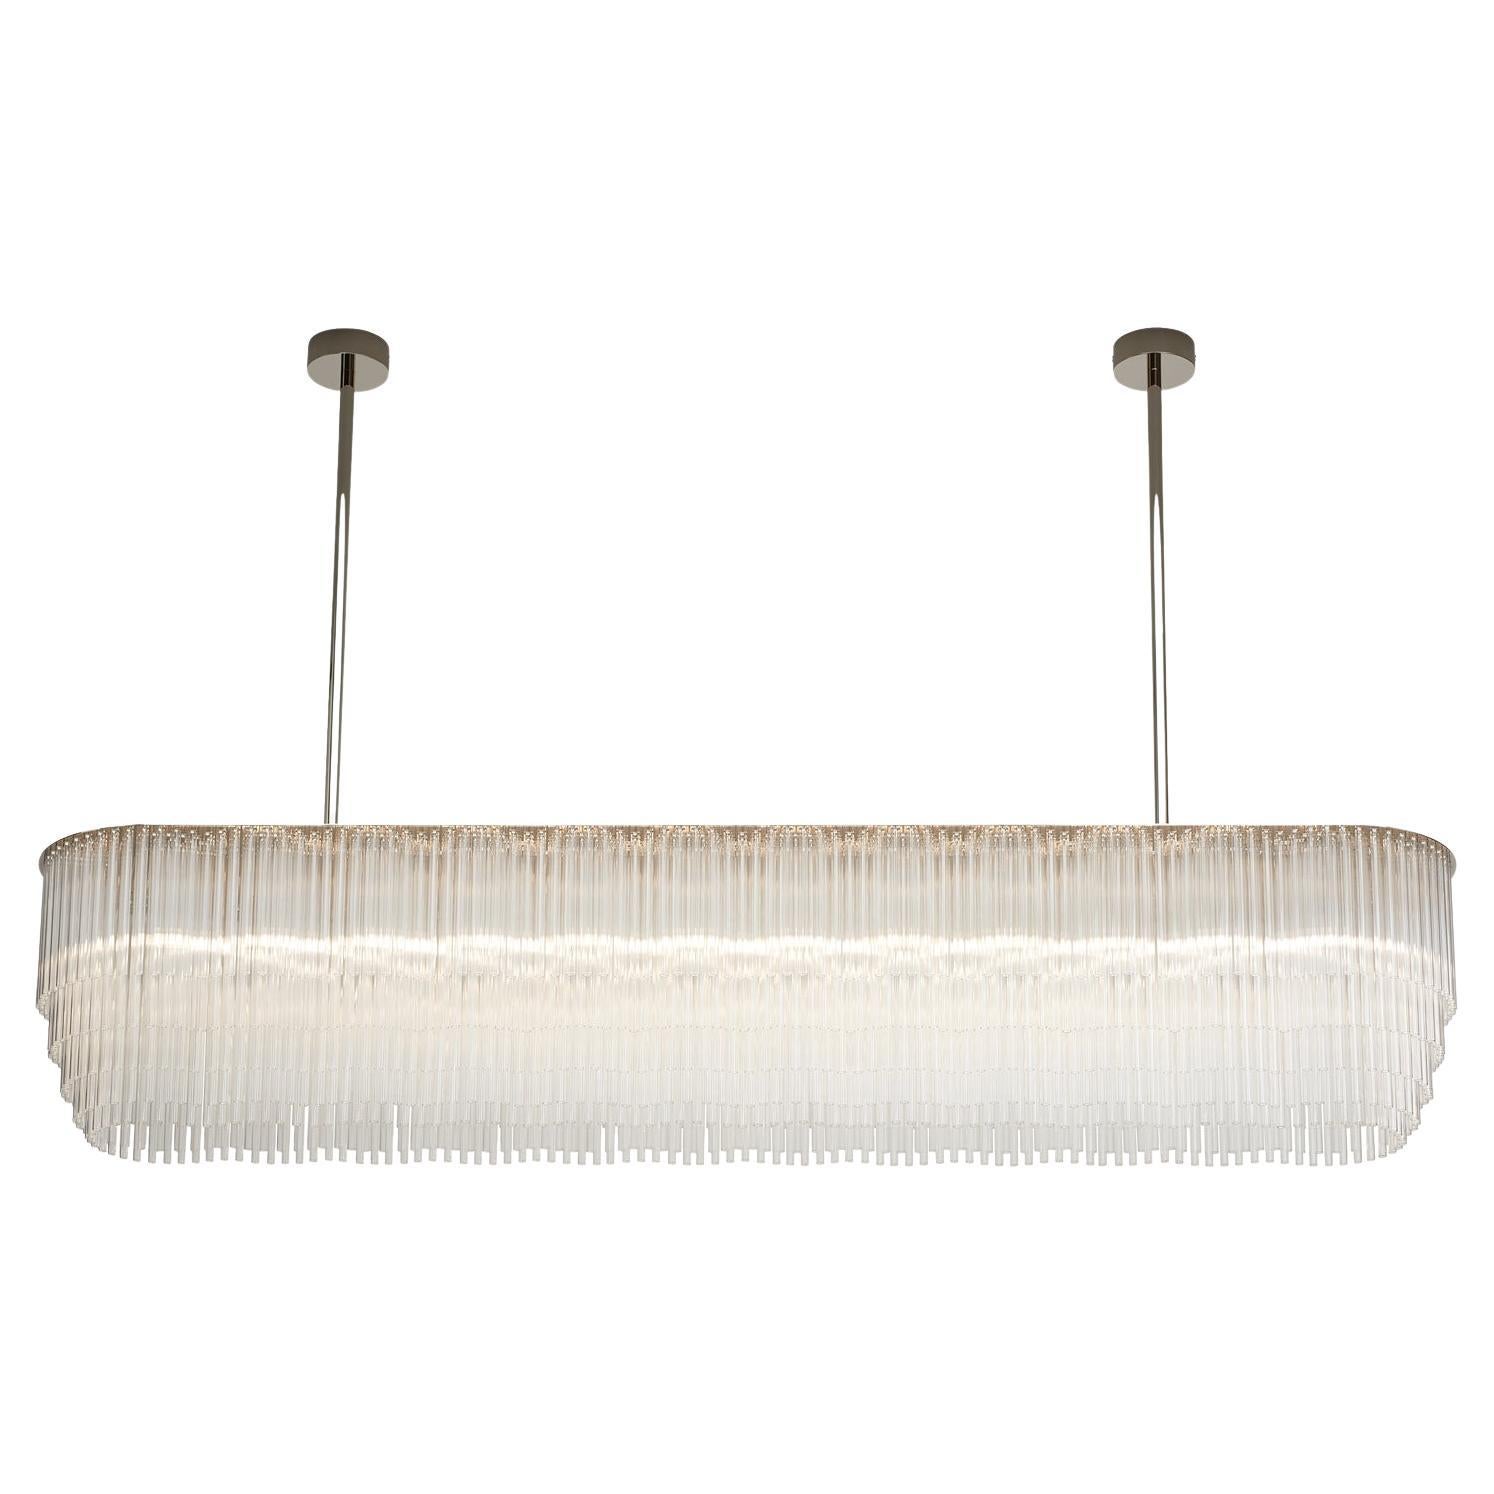 Linear Chandelier 1915mm / 75.25" in Polished Nickel, with Tiered Glass Profile